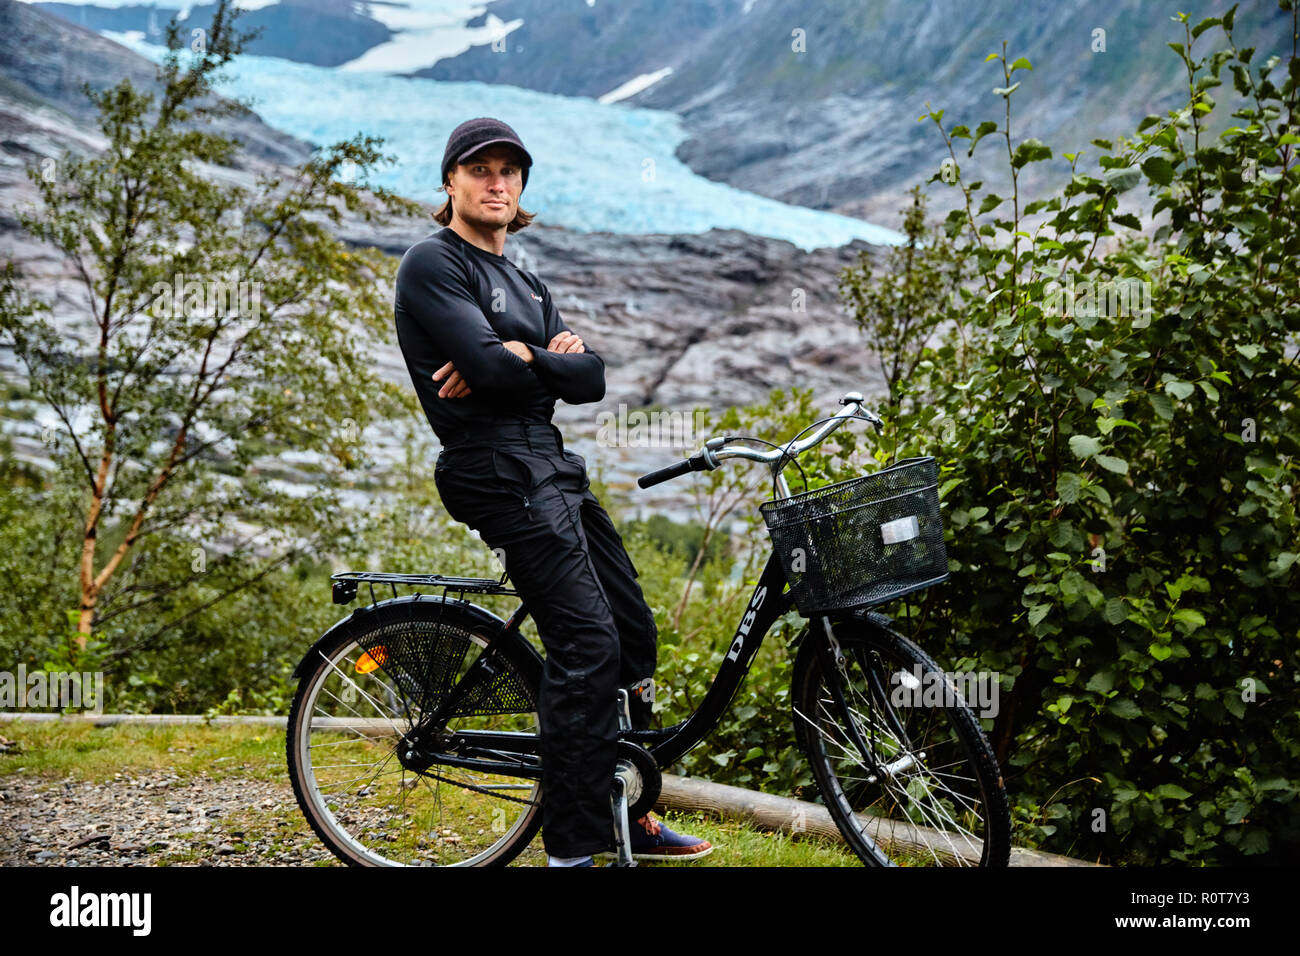 Young man in black dresses on bicycle, with black cap, Svartisen glacier on background Stock Photo